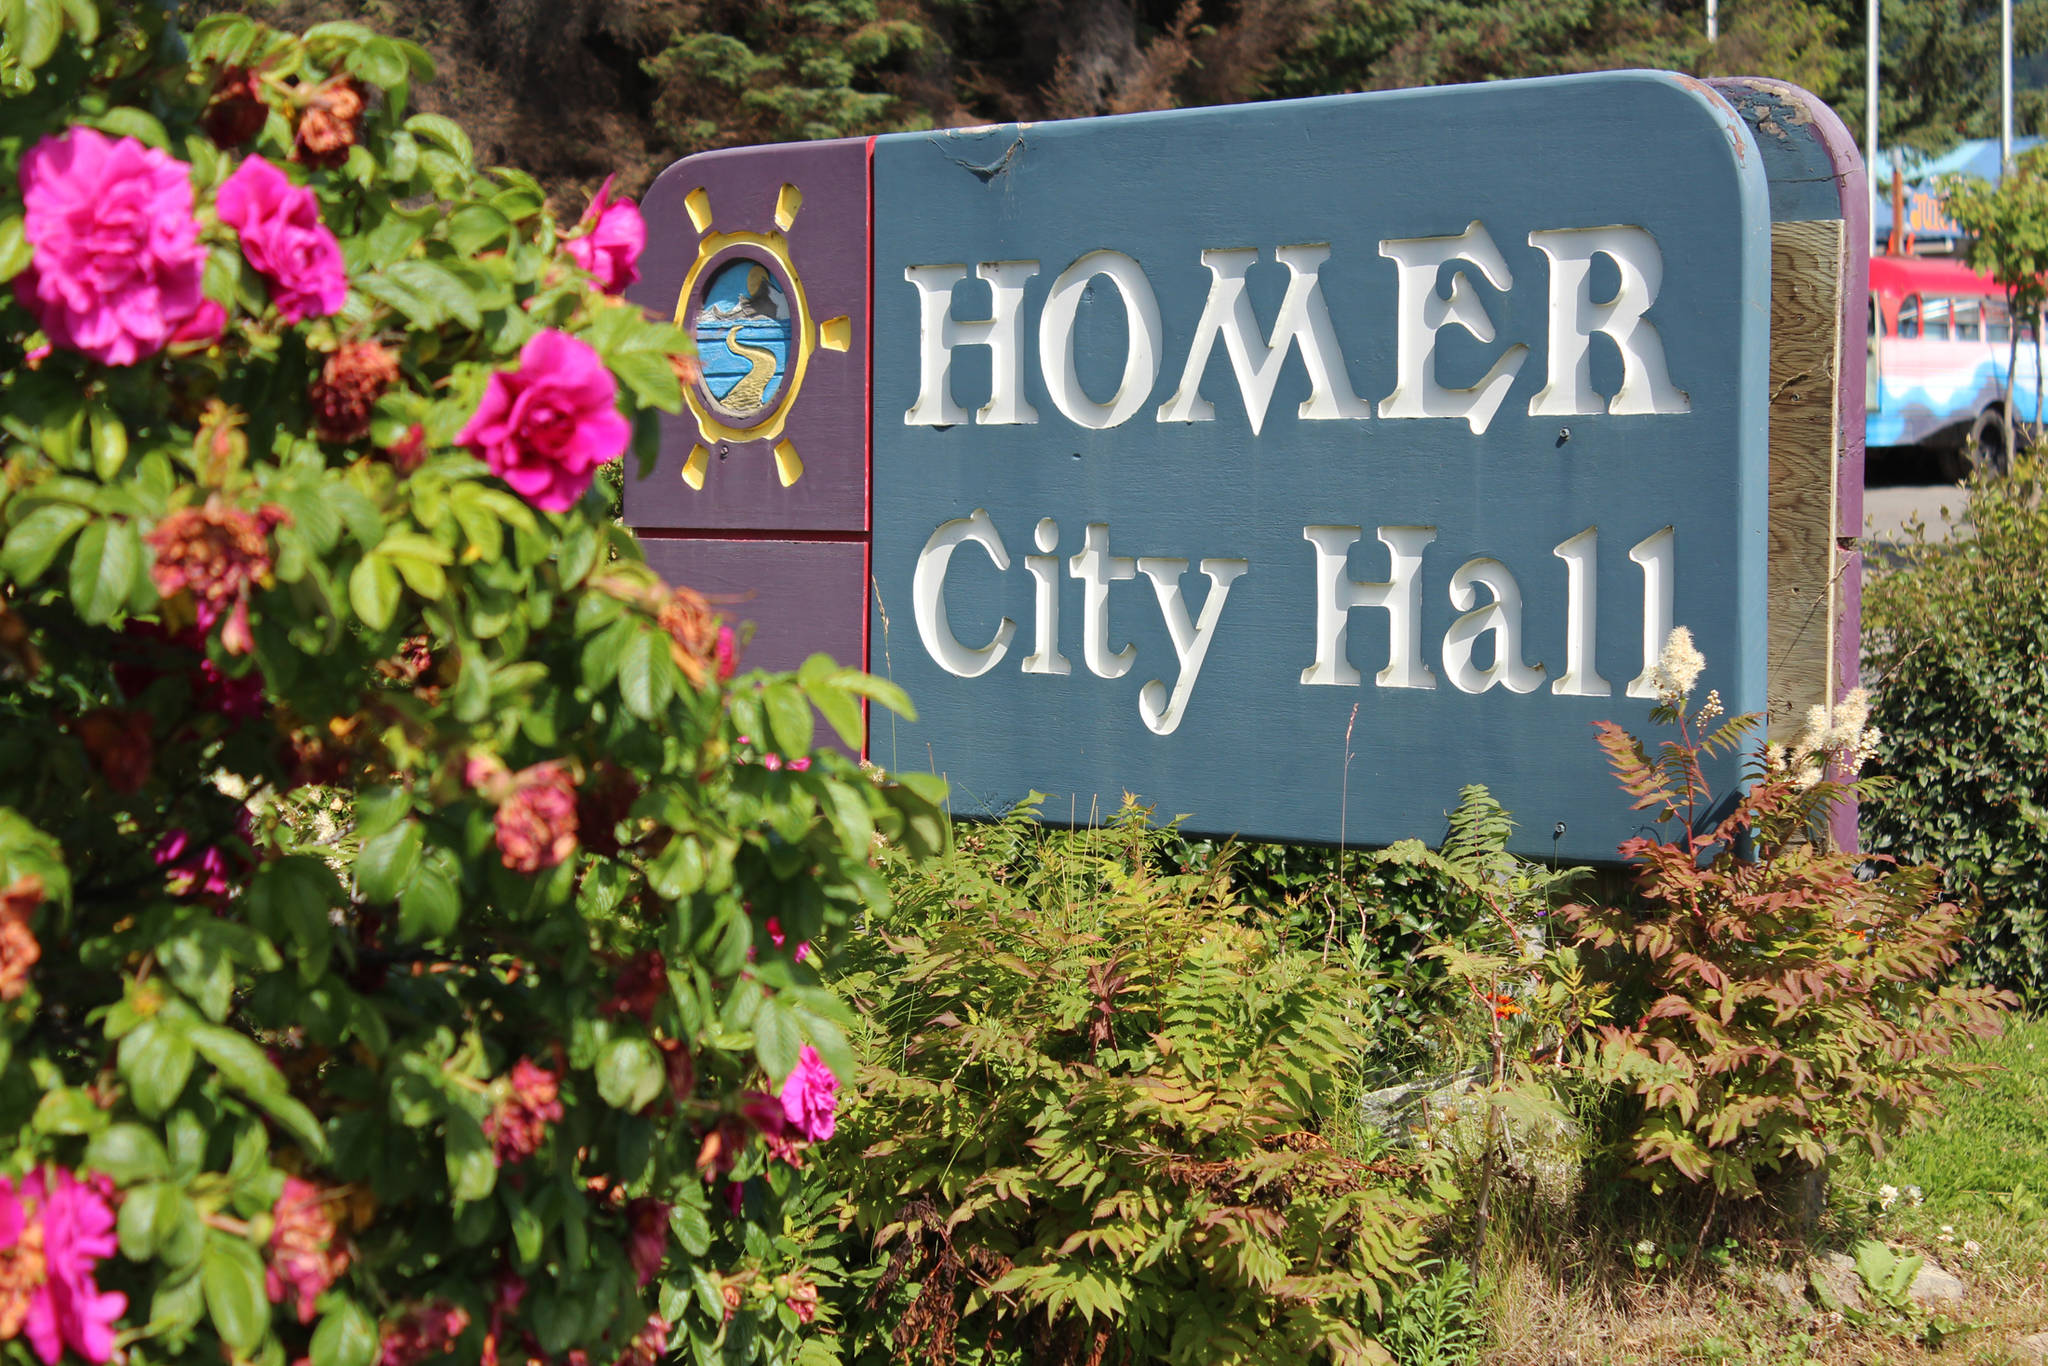 Three file to run for Homer City Council seat